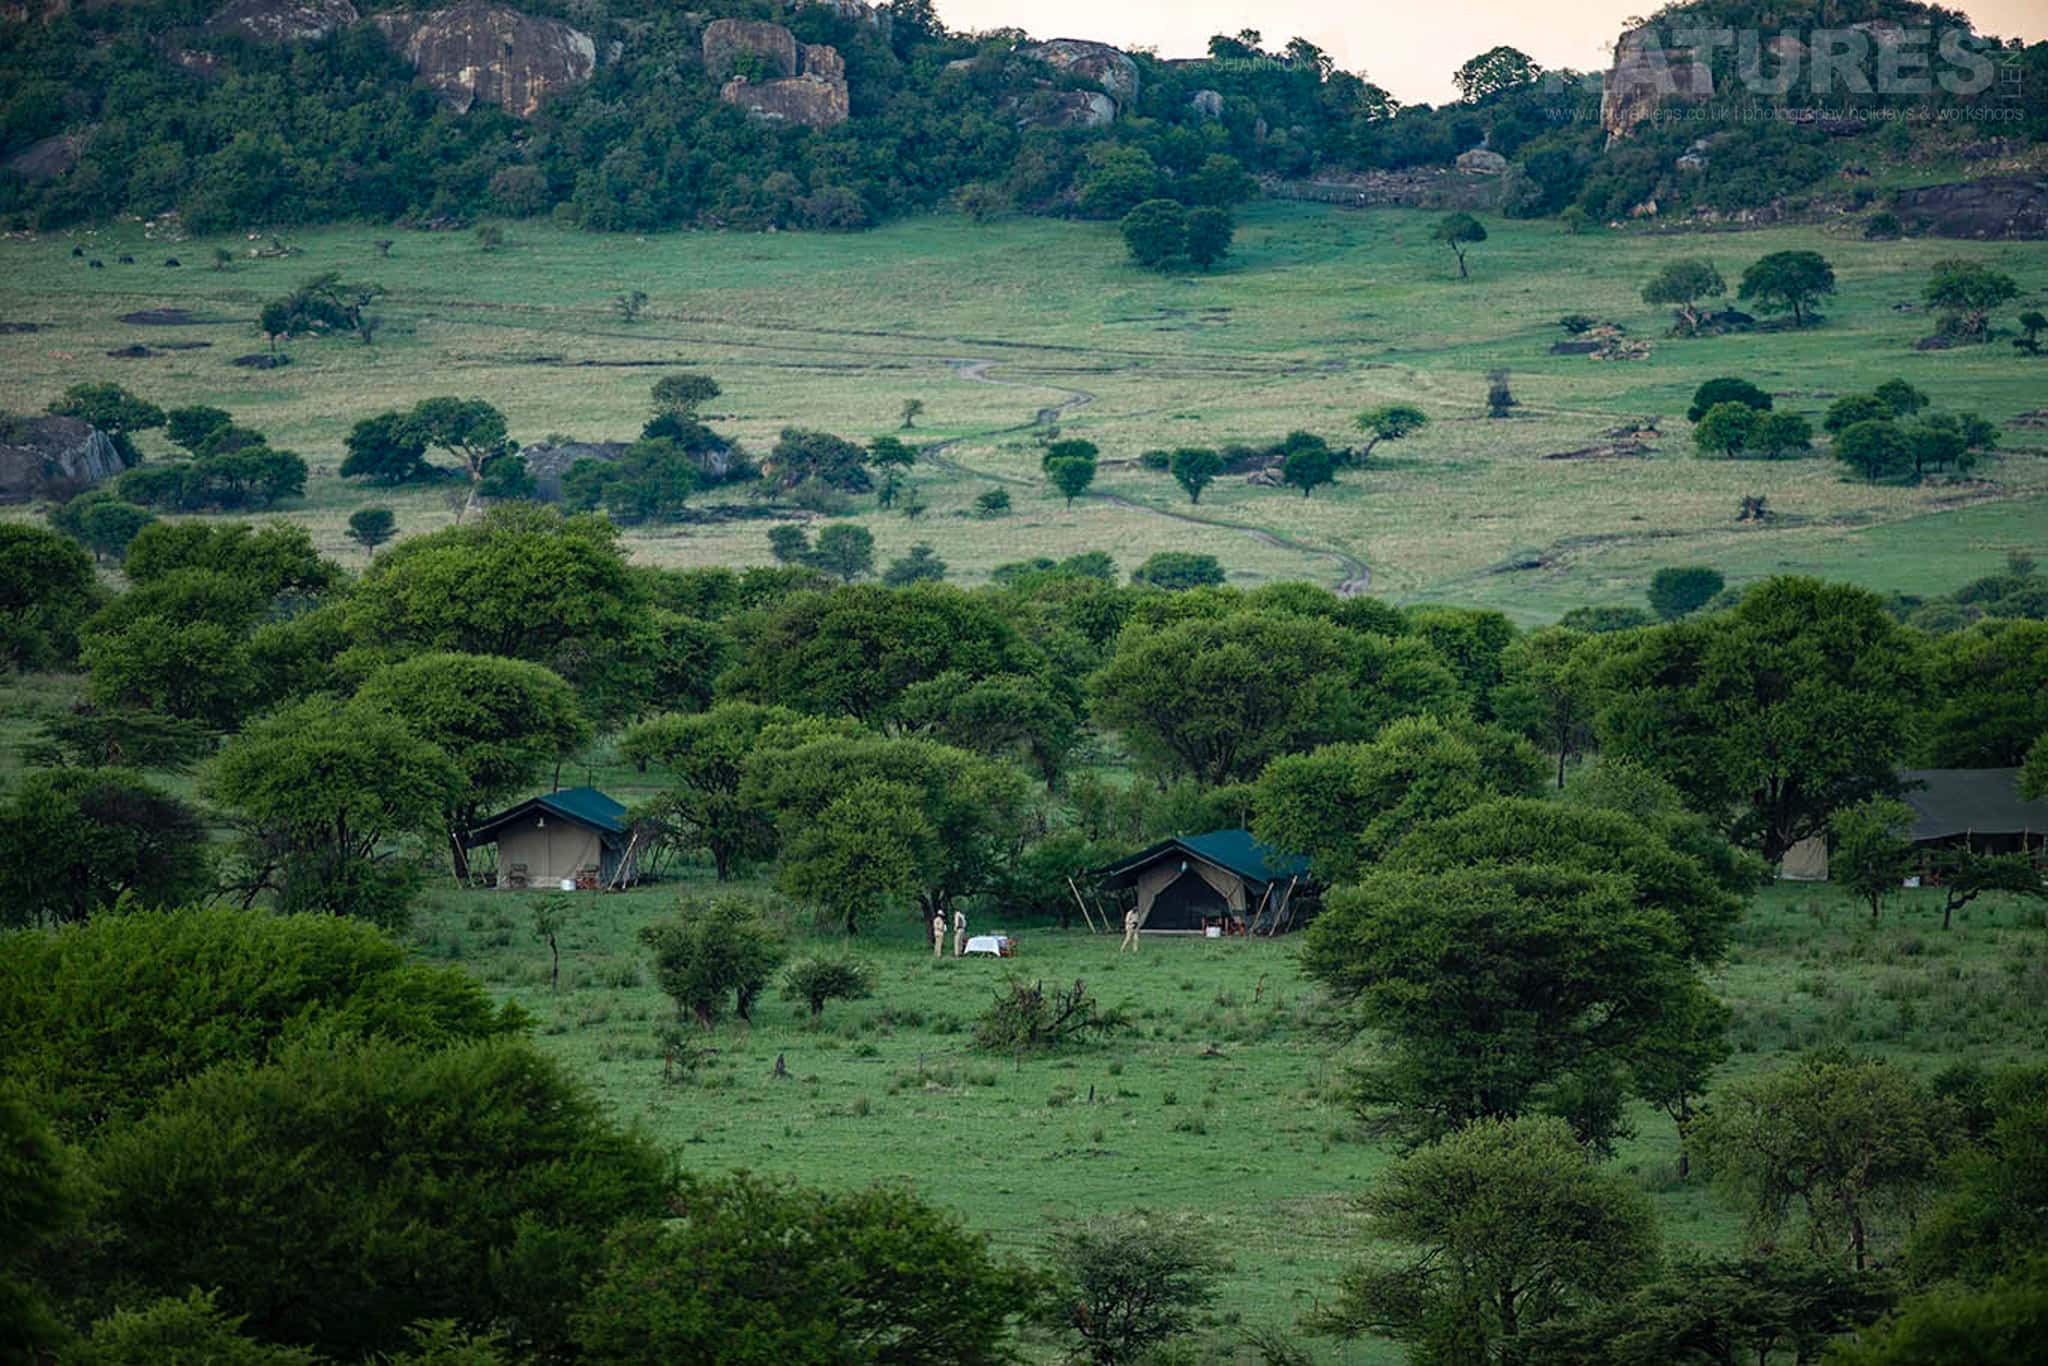 A View Of The Camp That We Use For The Natureslens Wildlife Of The Serengeti Photography Holiday Nestled Amongst The Trees